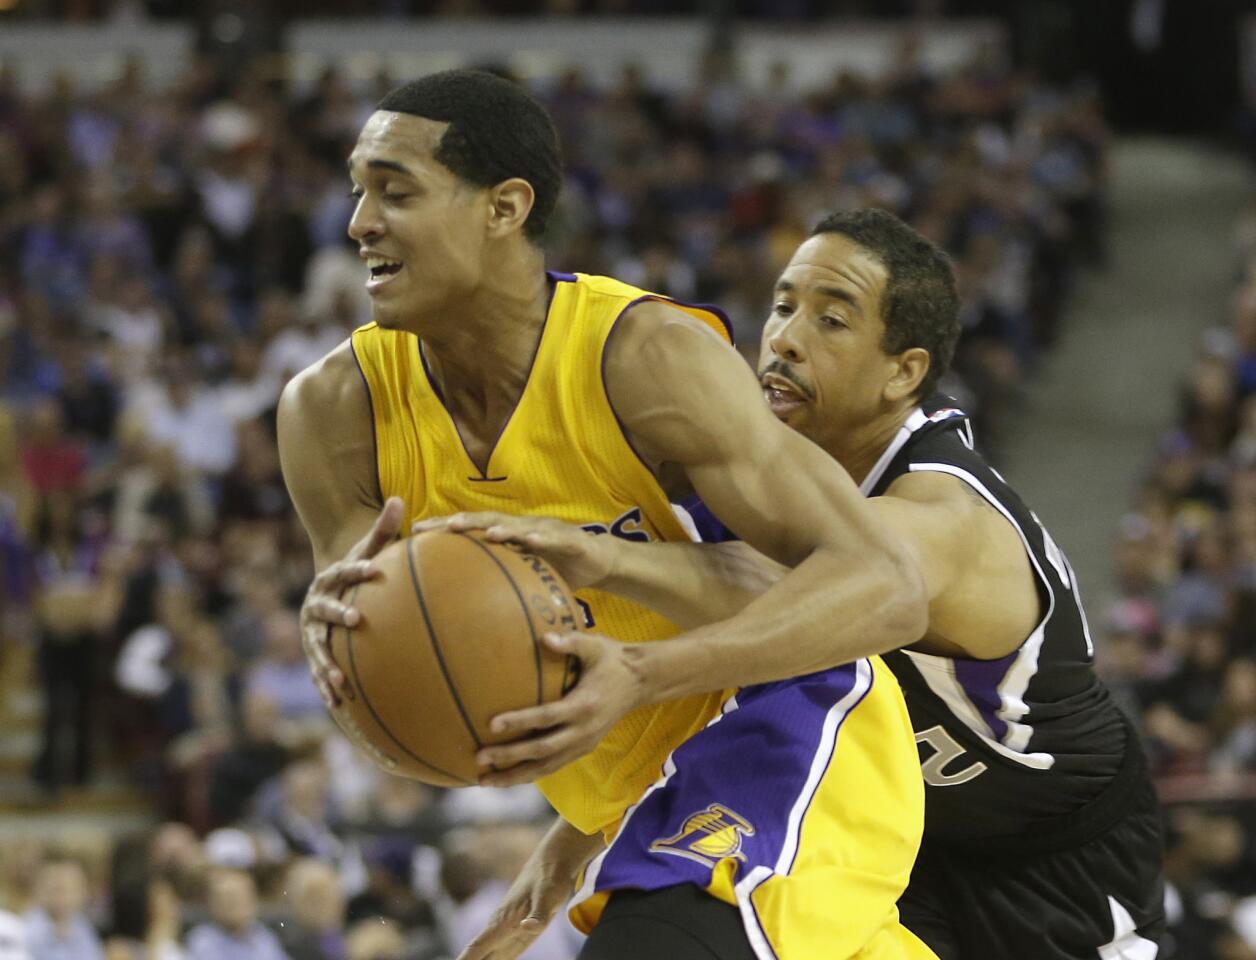 Kings veteran guard Andre Miller reaches around Lakers point guard Jordan Clarkson to try to steal the ball.